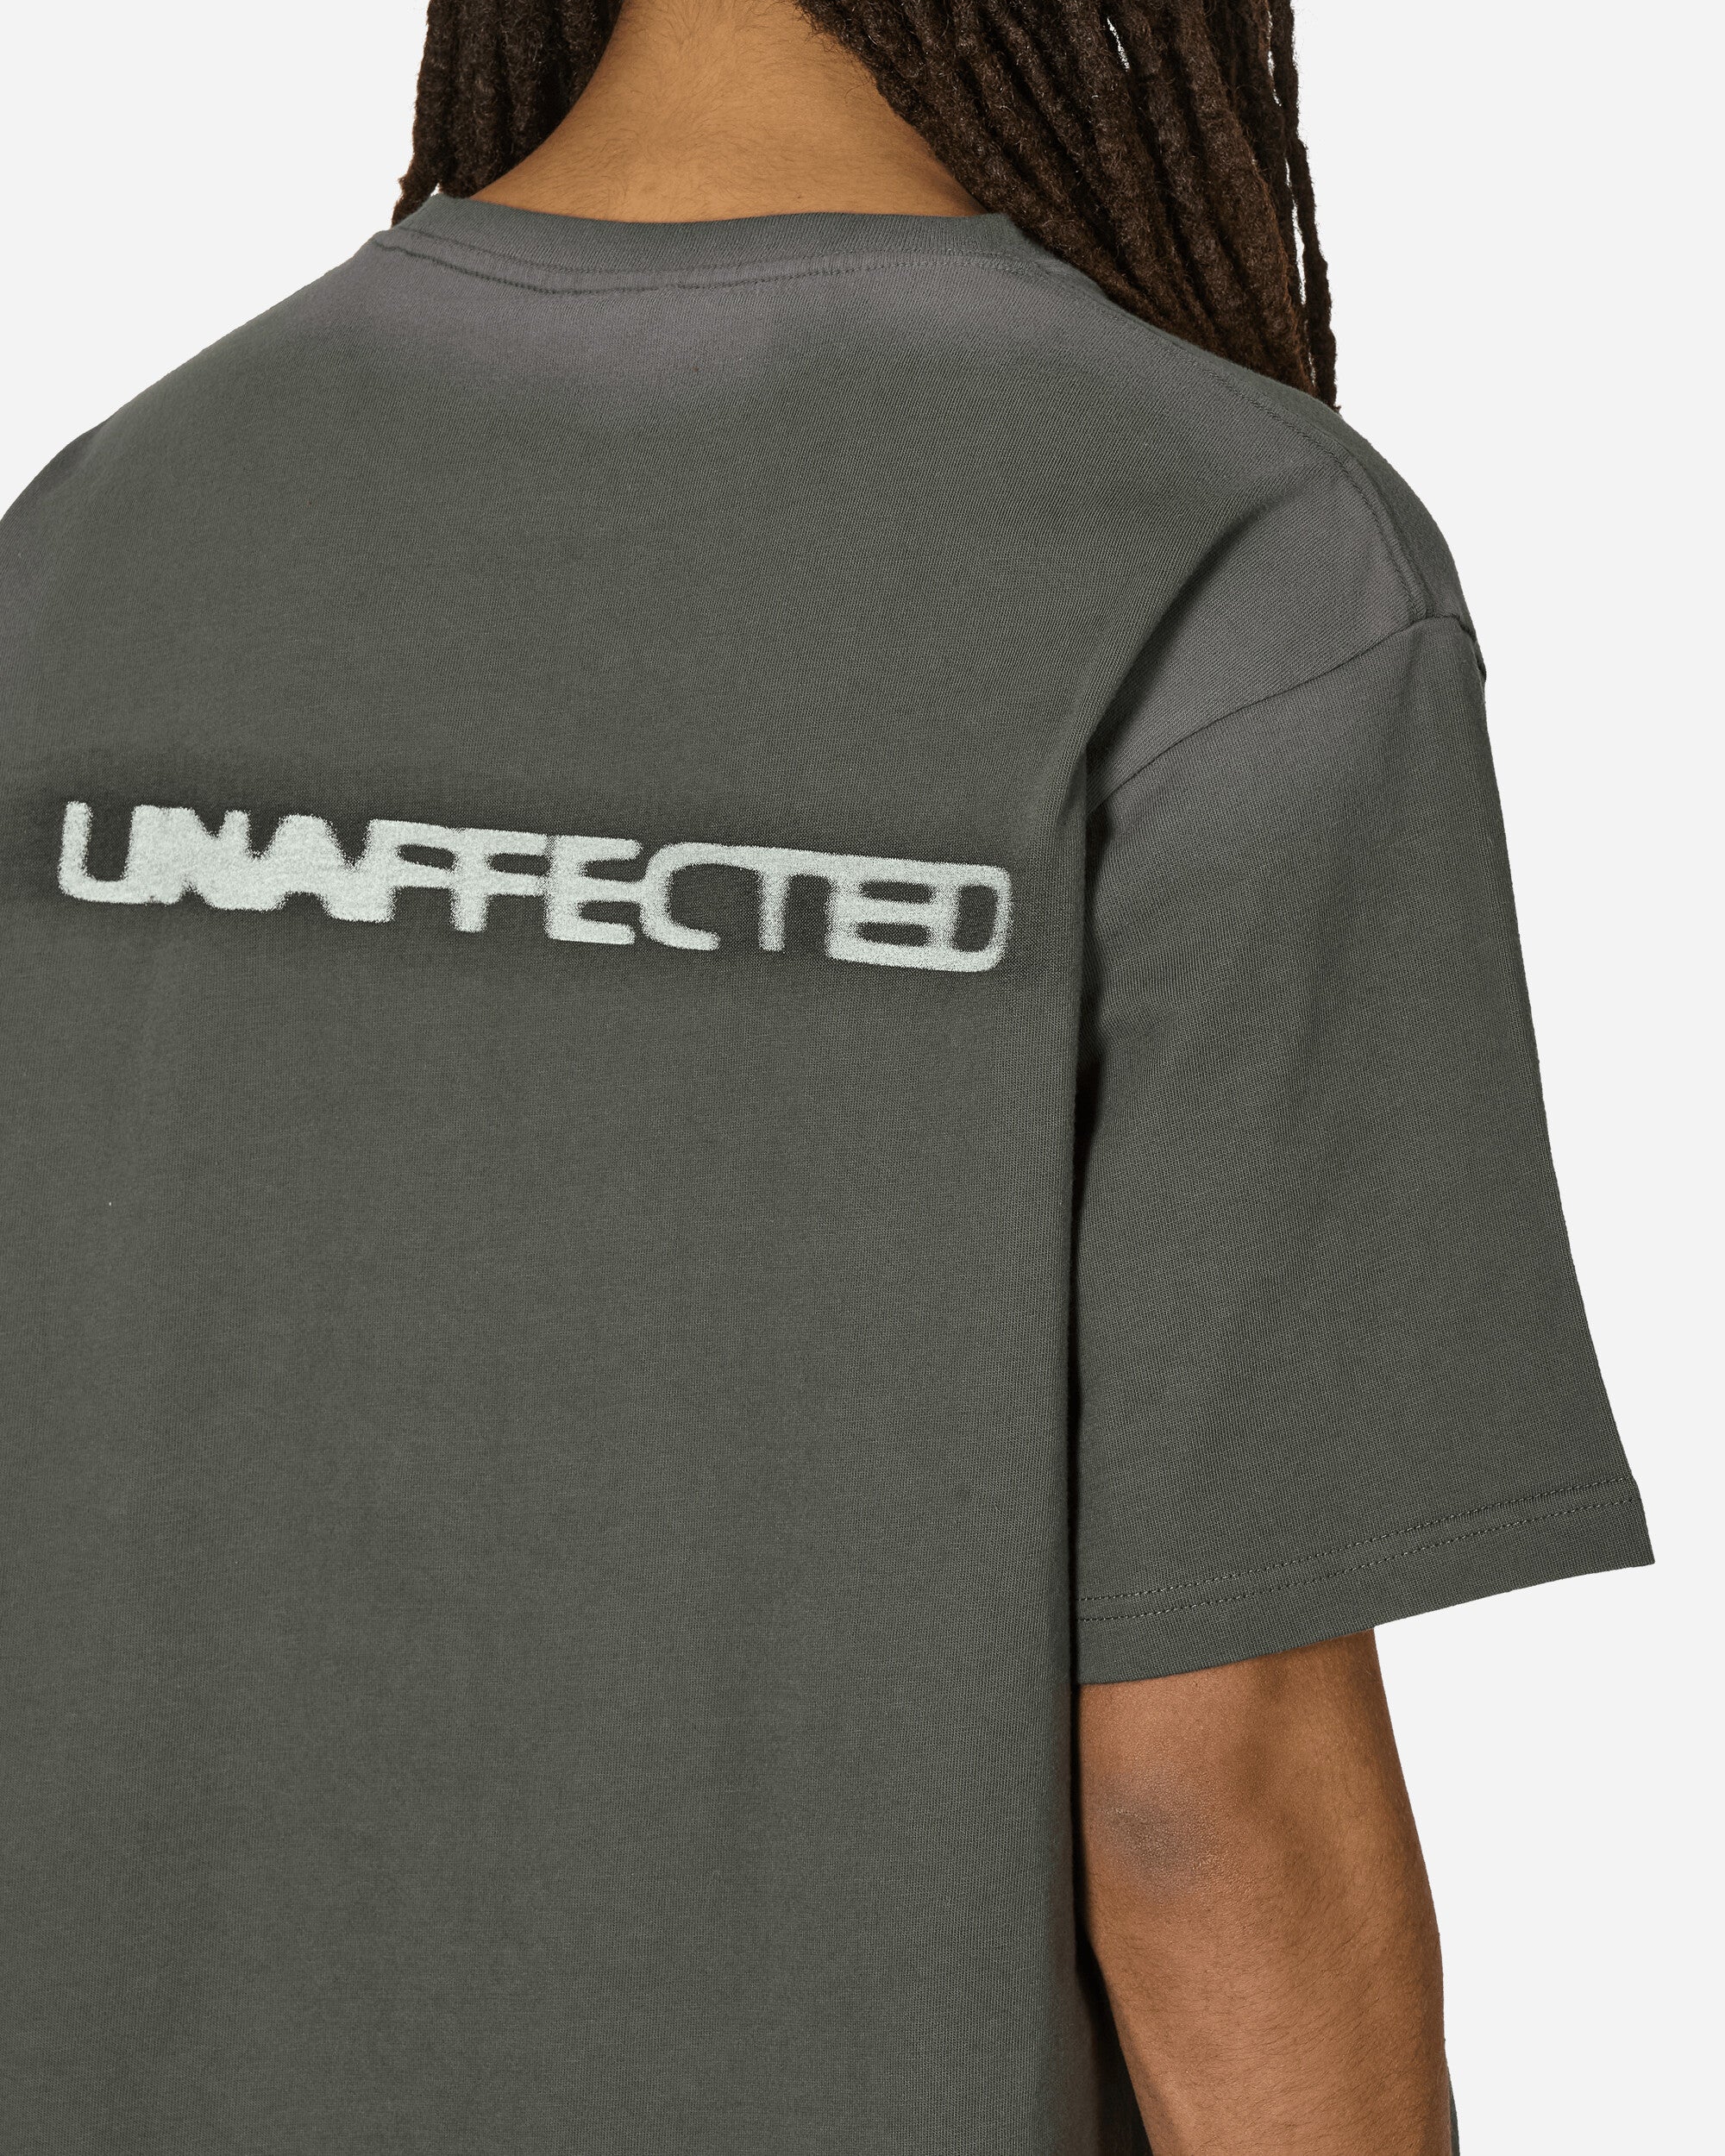 Unaffected Sprayed Graphic T-Shirt Charcoal T-Shirts Shortsleeve UN24SSHTS06 CHARCOAL